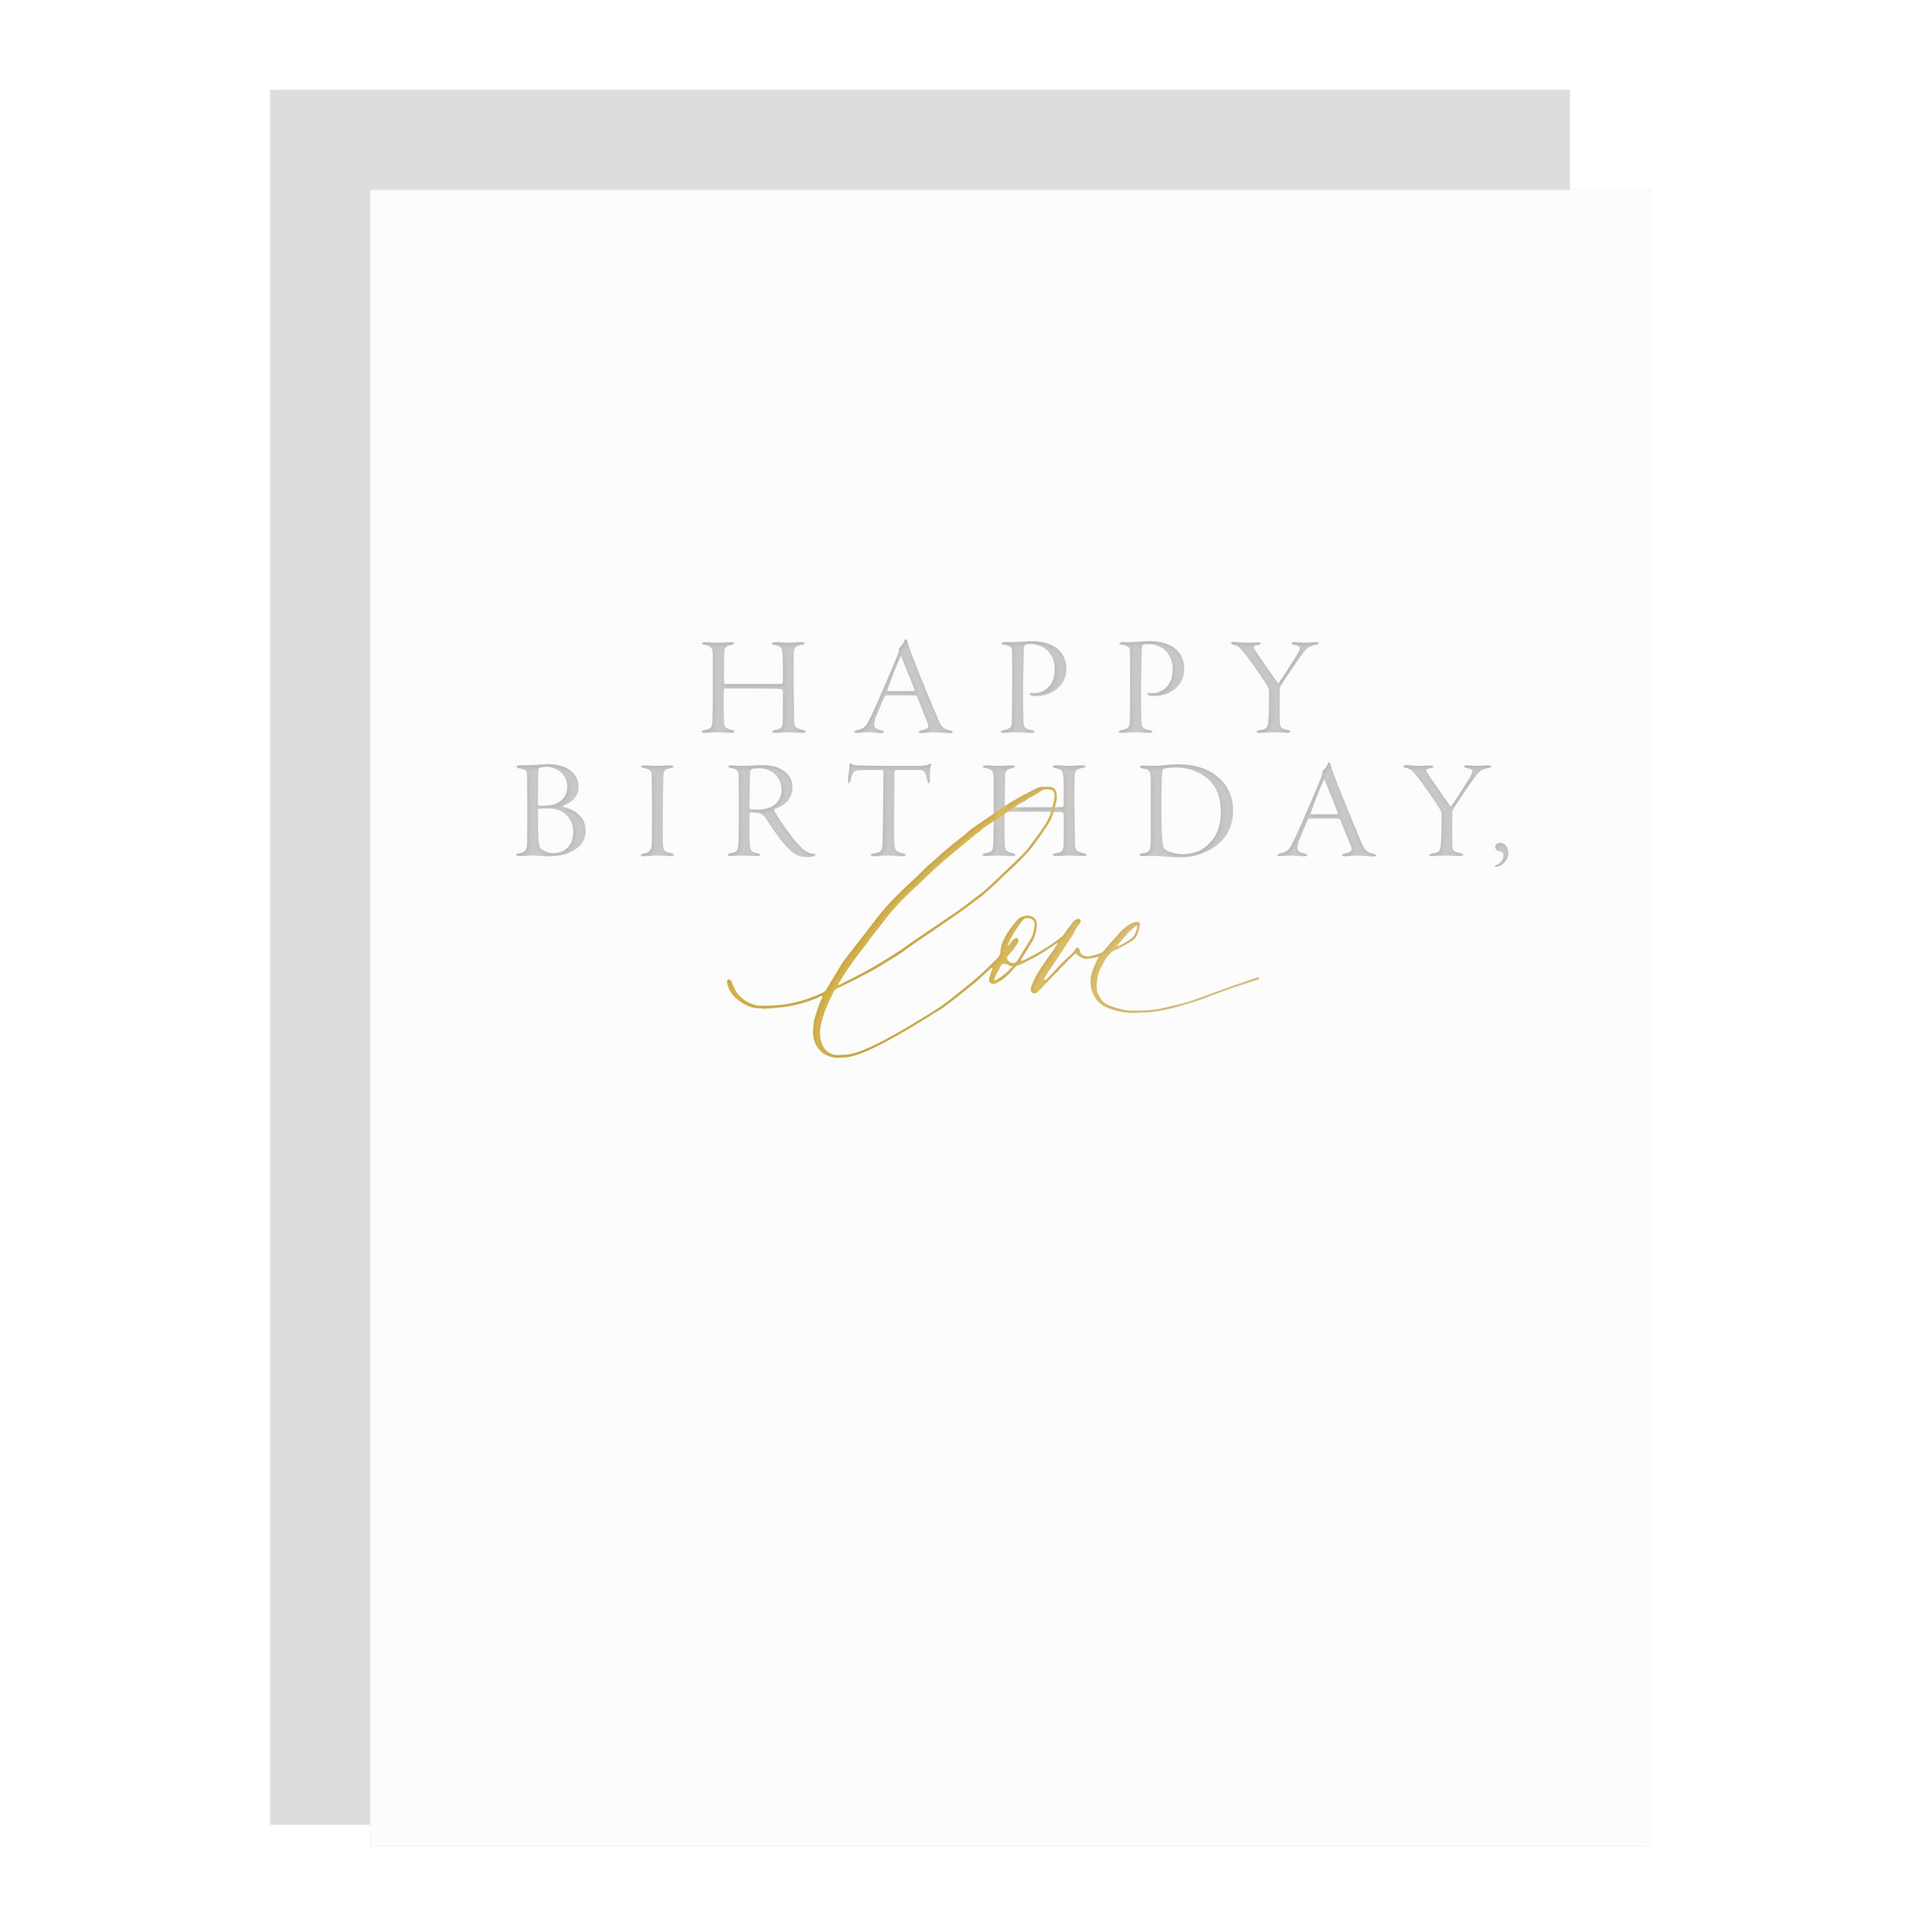 "Happy Birthday, Love" birthday card, letterpress printed by hand in pale grey ink and gold foil. 